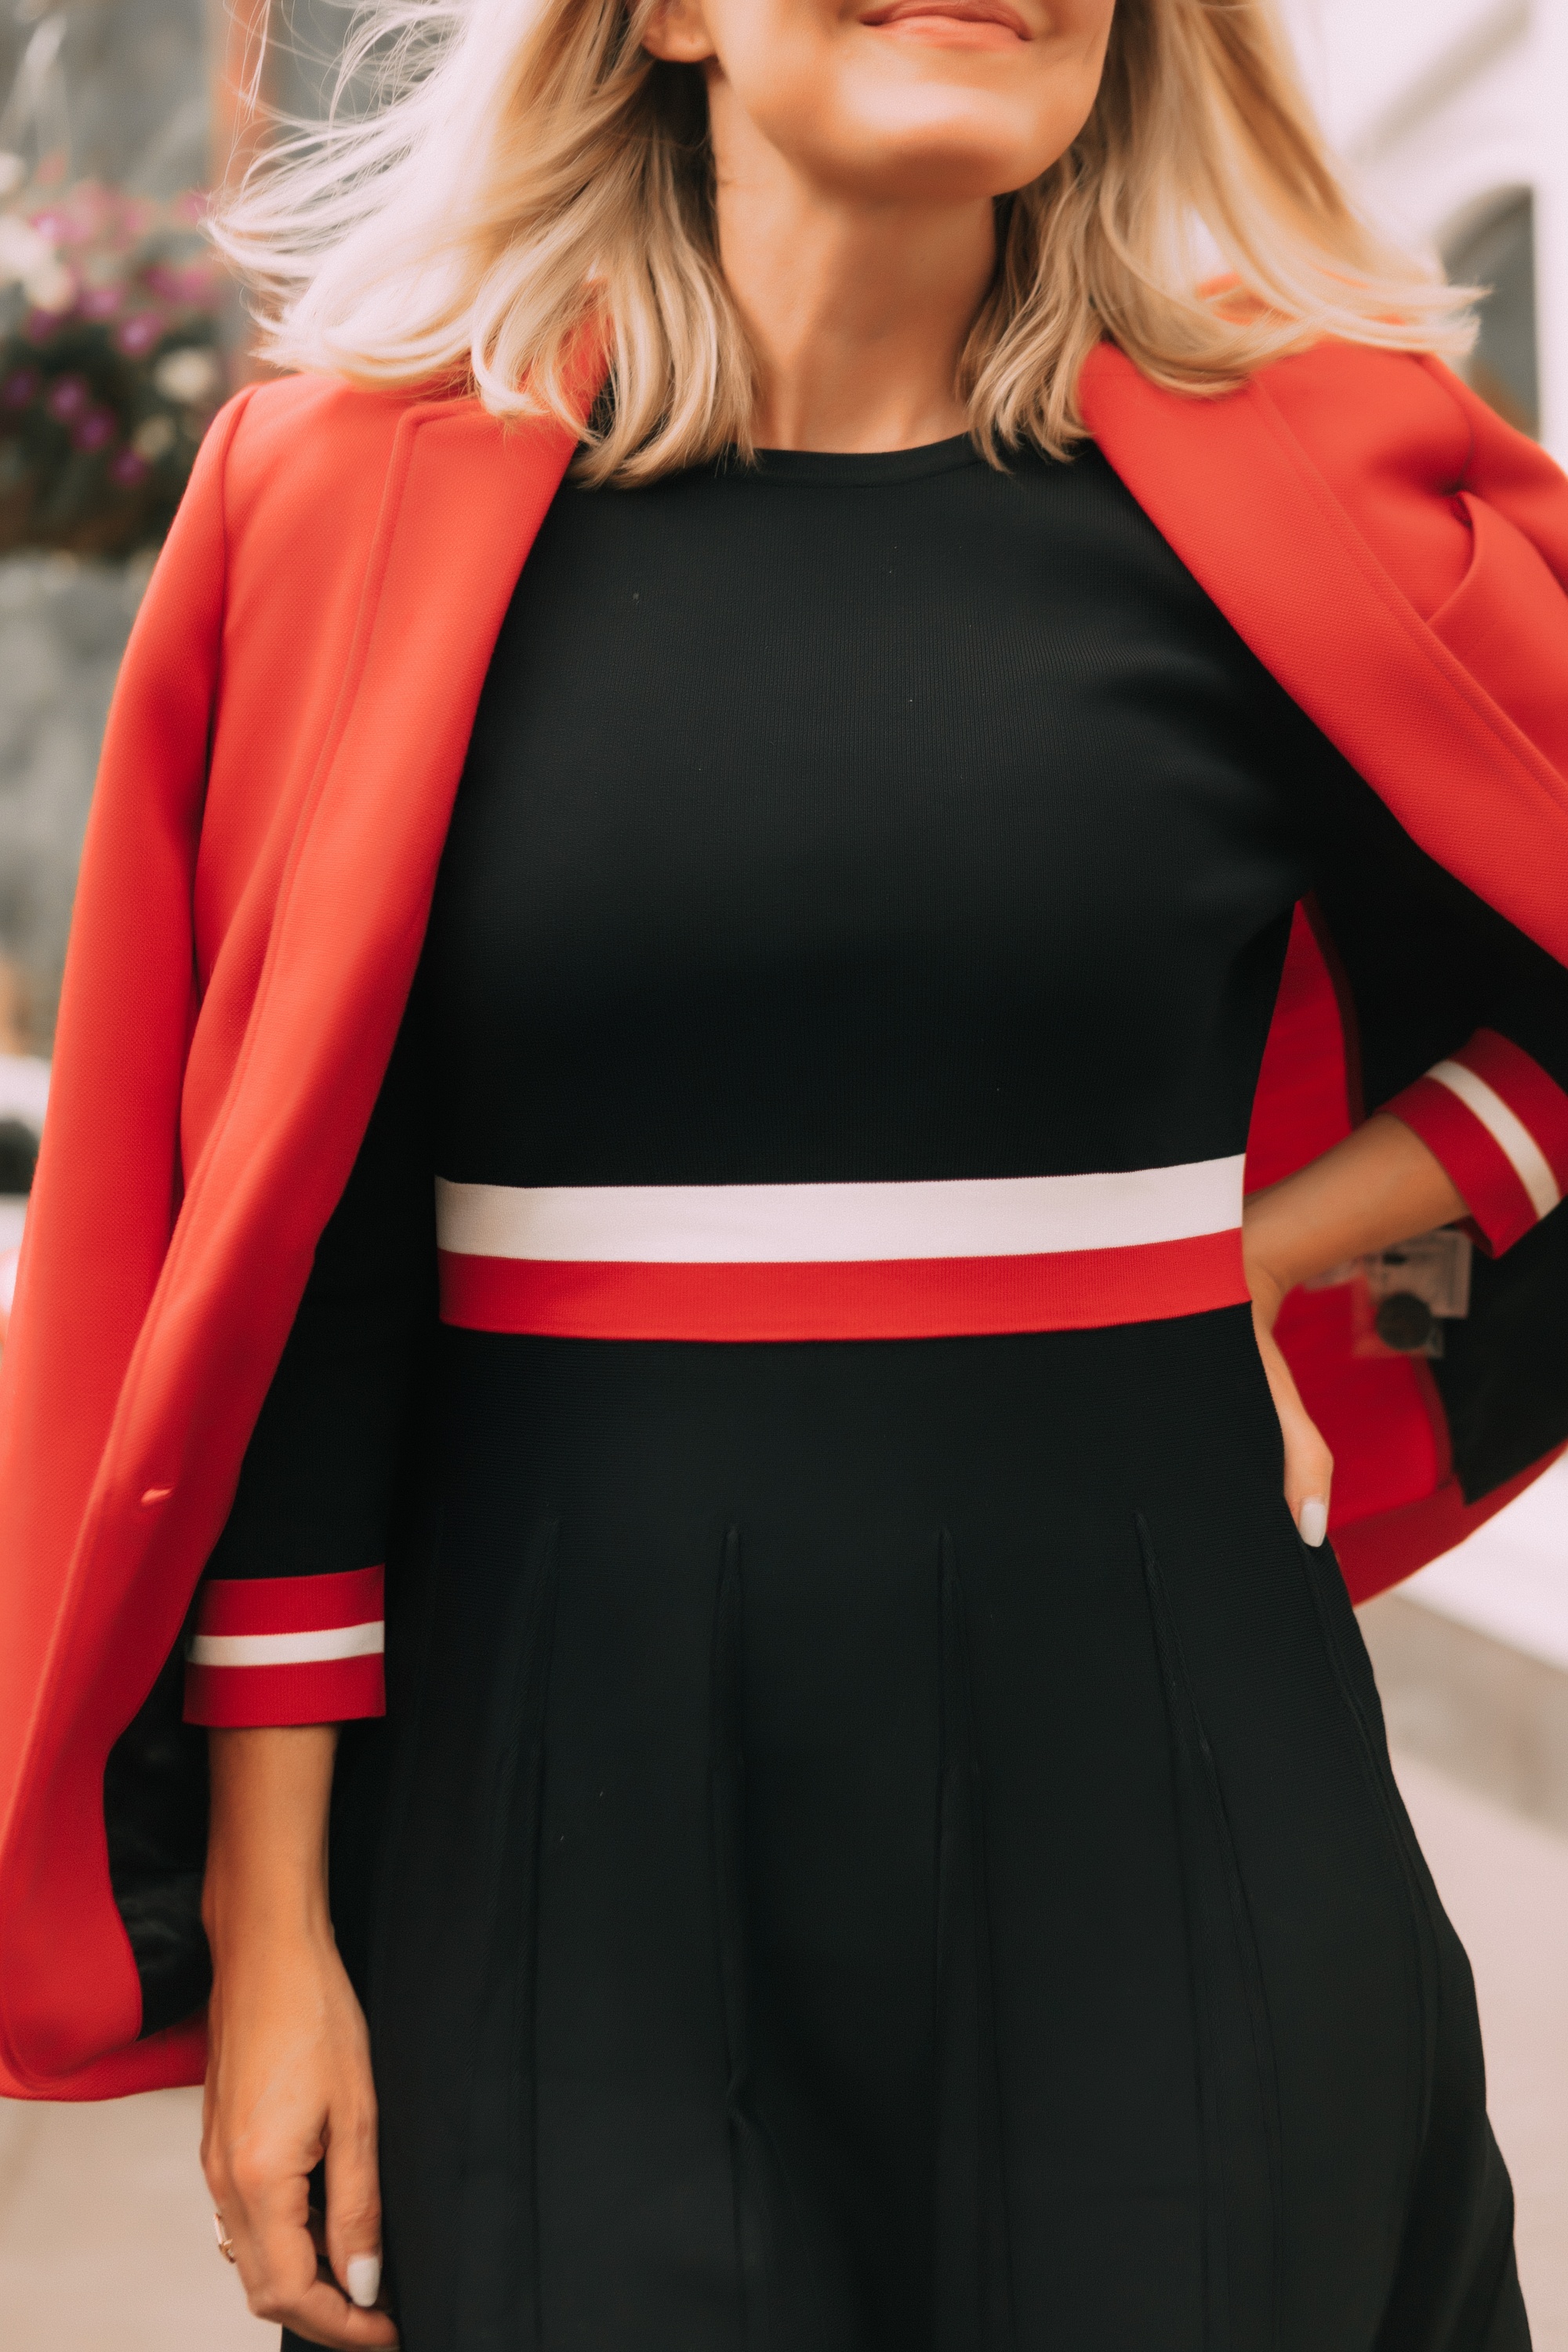 Colorful Office Outfits, Fashion blogger Erin Busbee of BusbeeStyle.com wearing a red knit blazer and navy striped fit and flare dress by Tommy Hilfiger in Telluride, CO